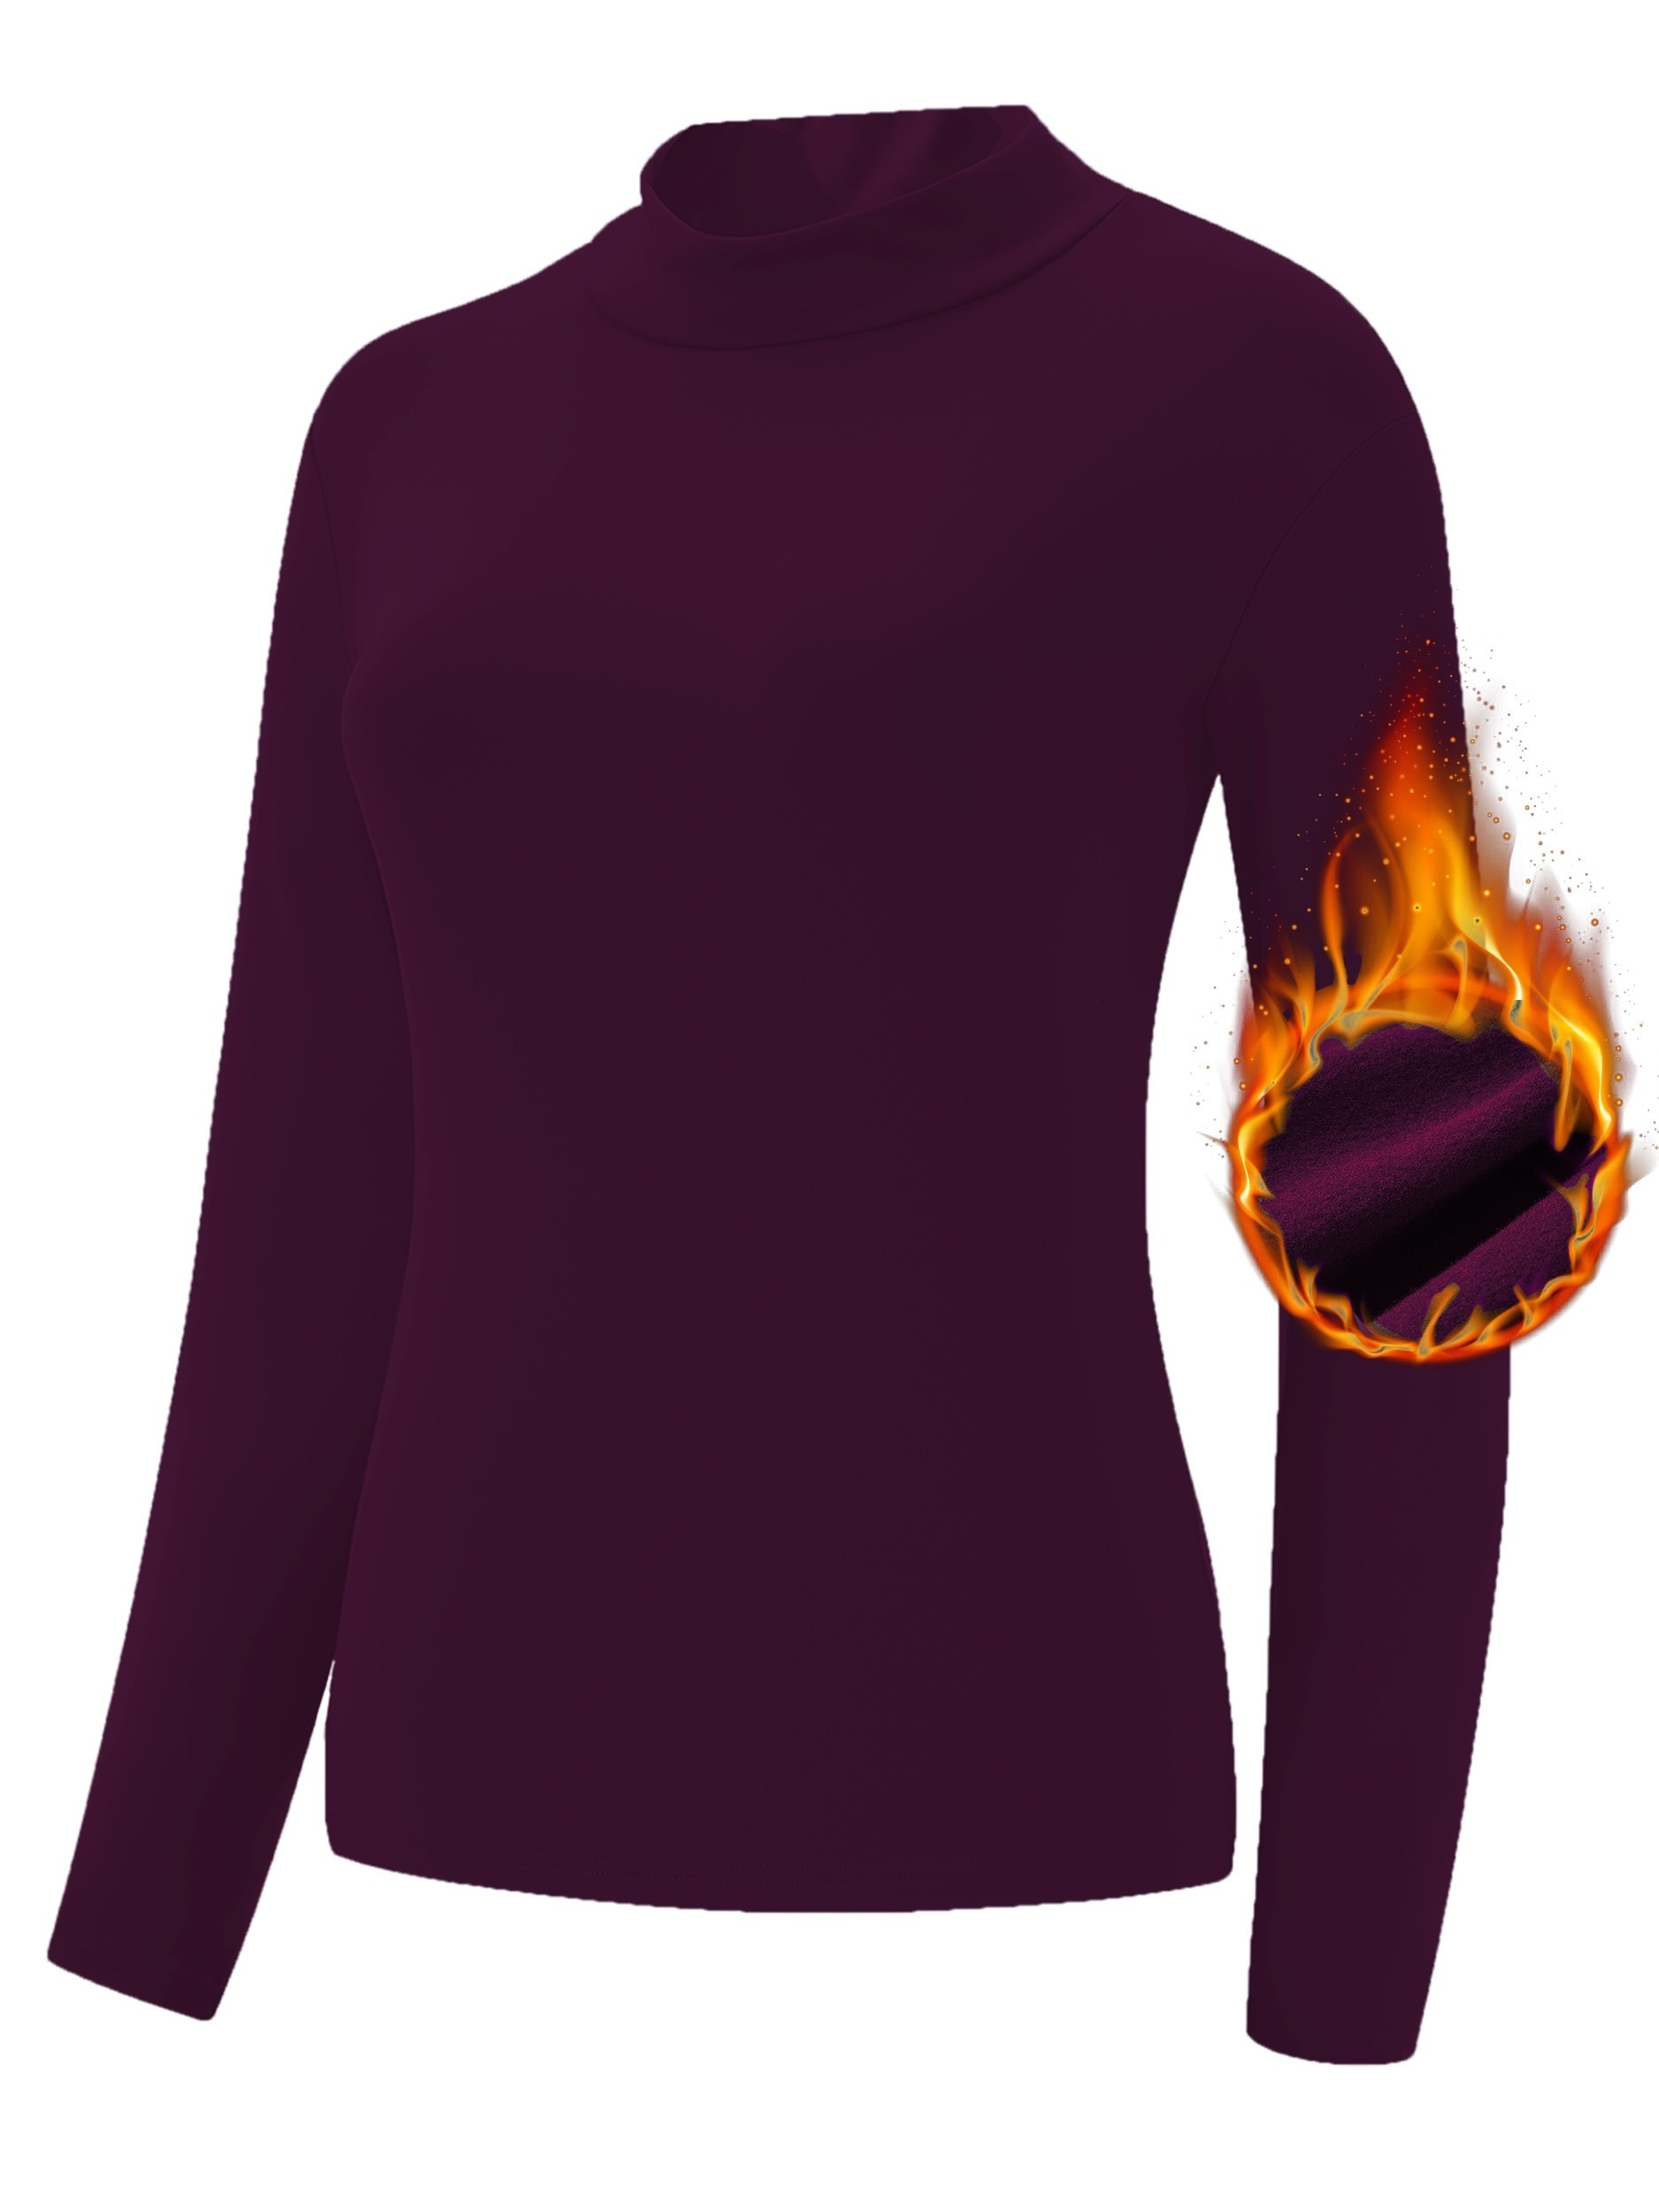 How To Layer A Sweater This Winter - The Dark Plum